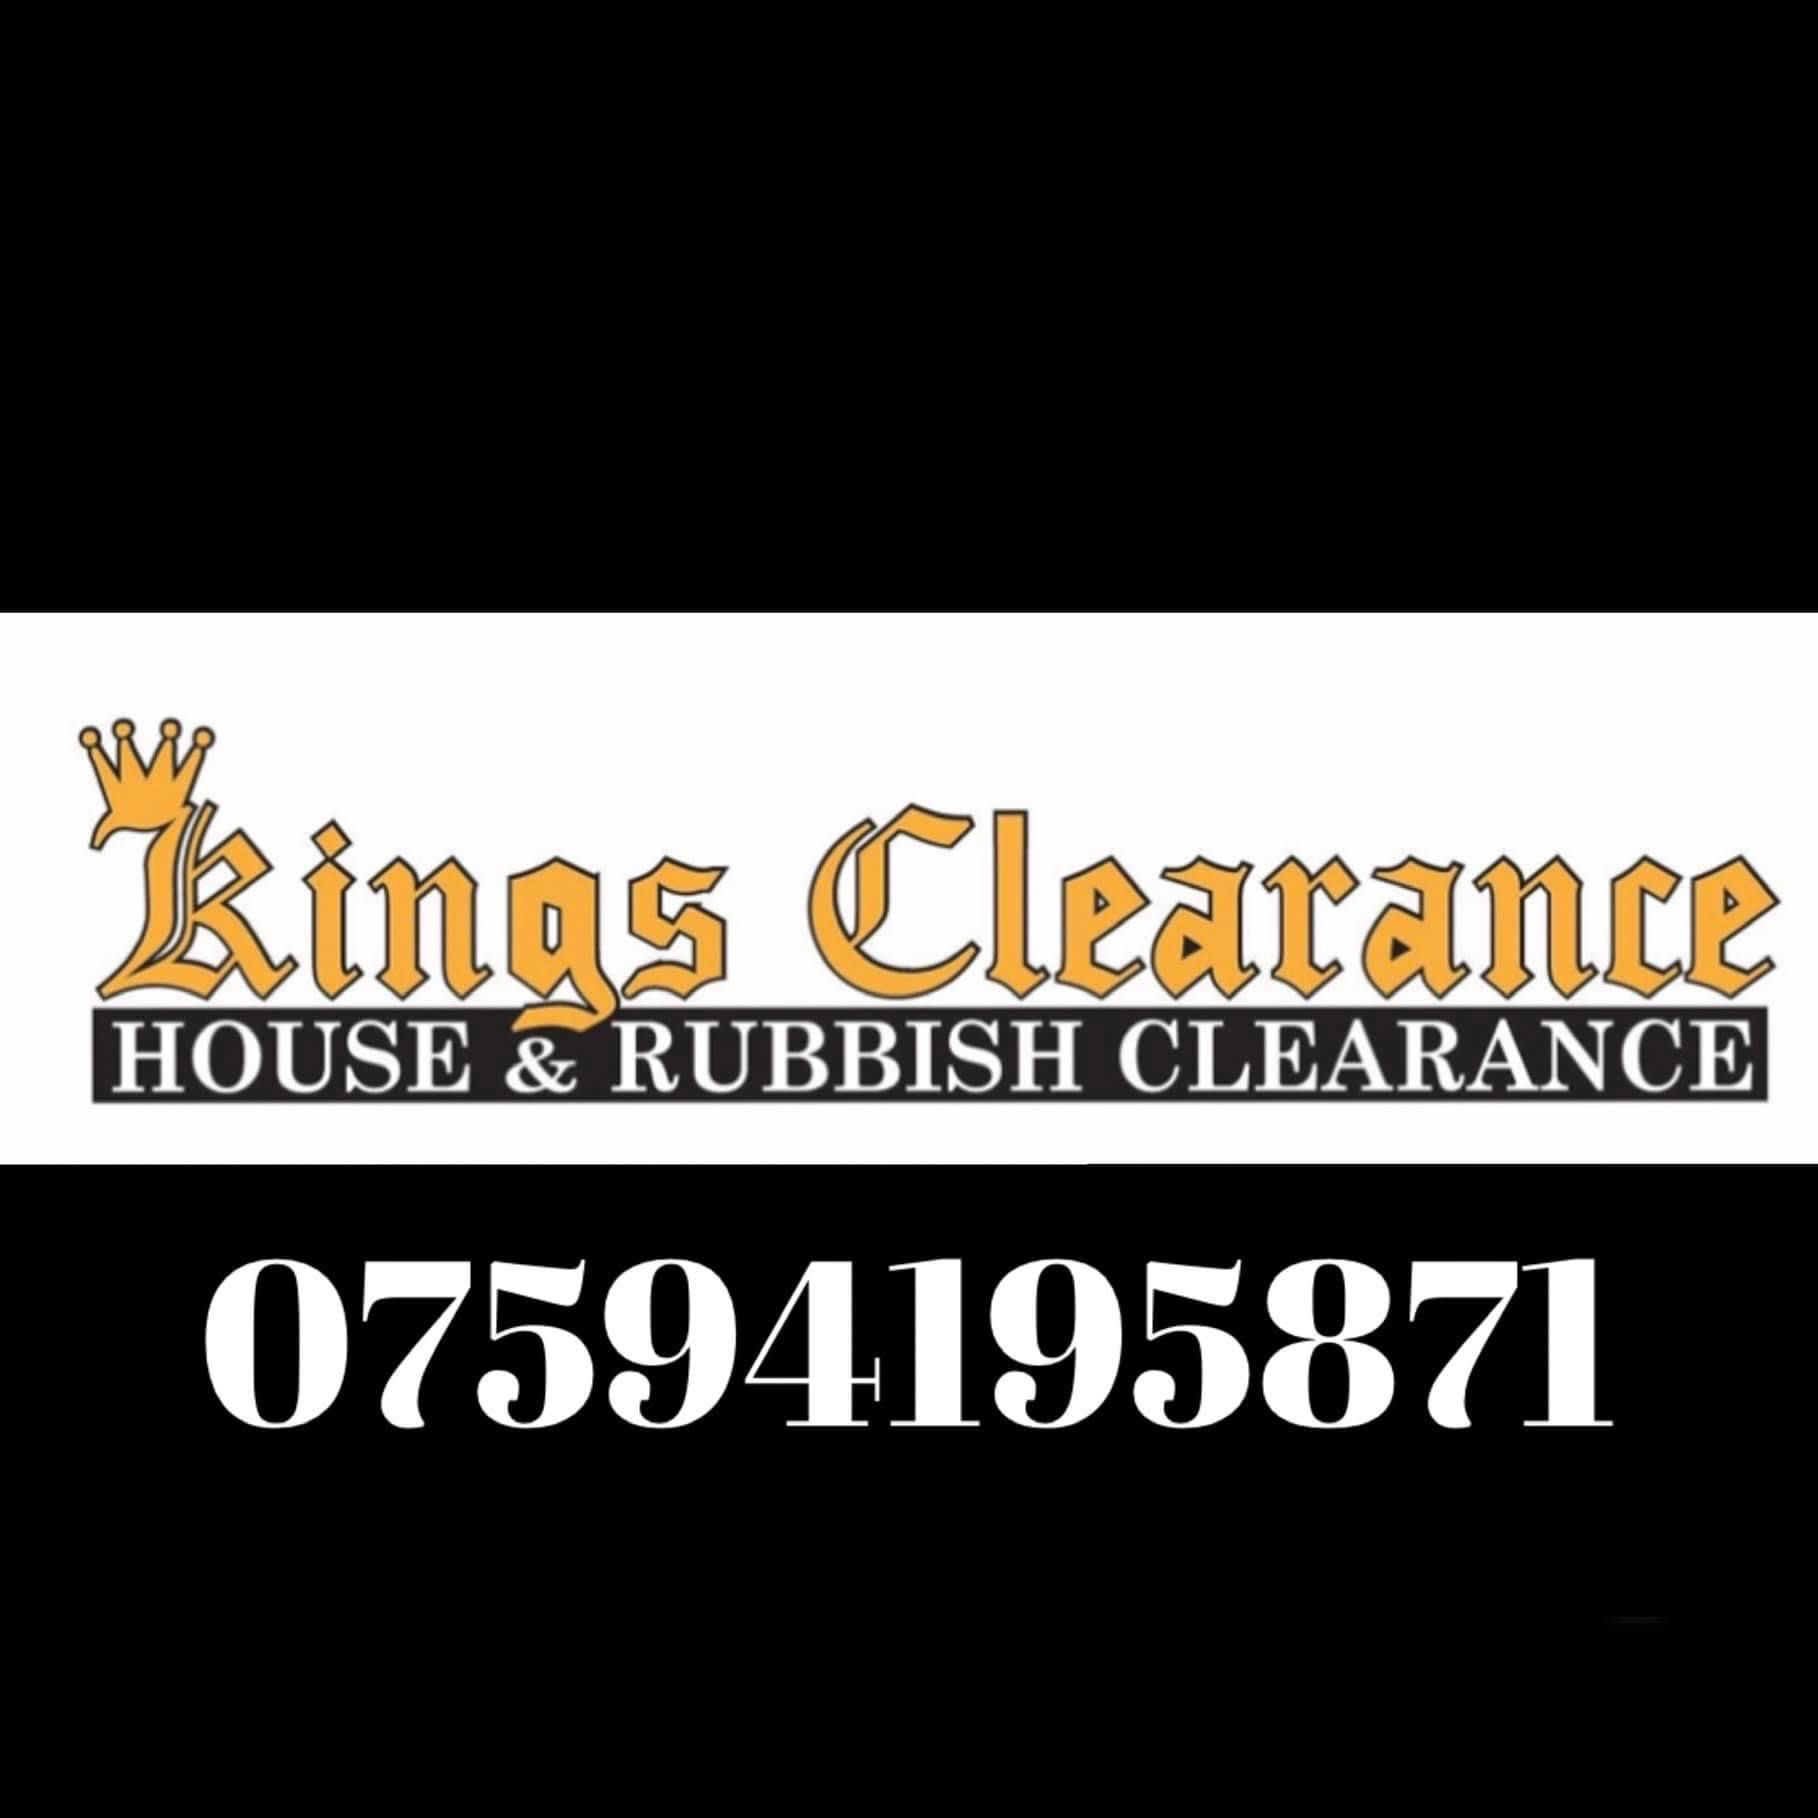 Kings Clearance Wareham Poole Bournemouth and Dorset